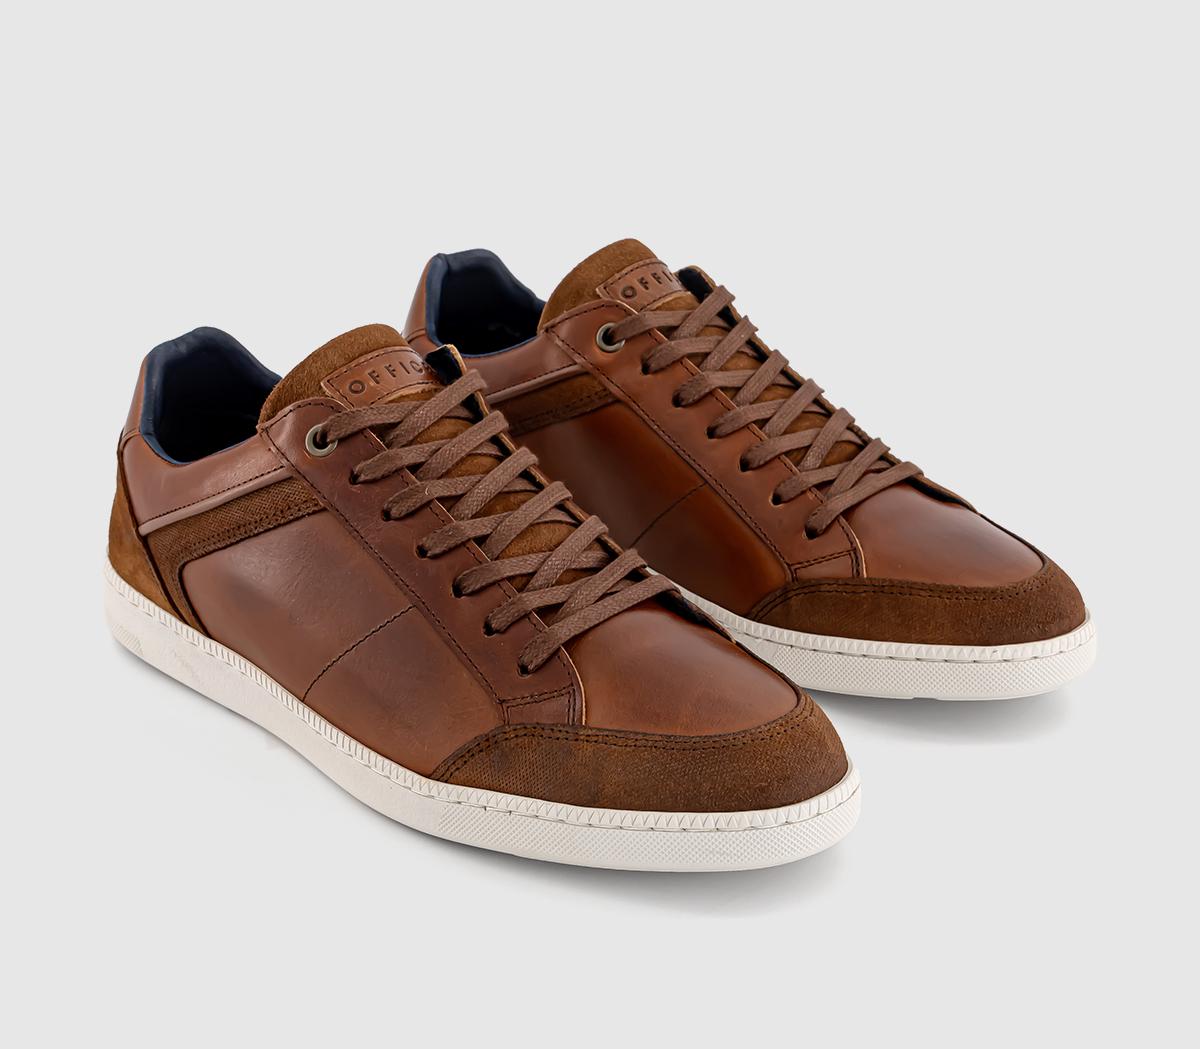 OFFICE Cottesloe Lace Up Trainers Tan Leather - Men's Casual Shoes